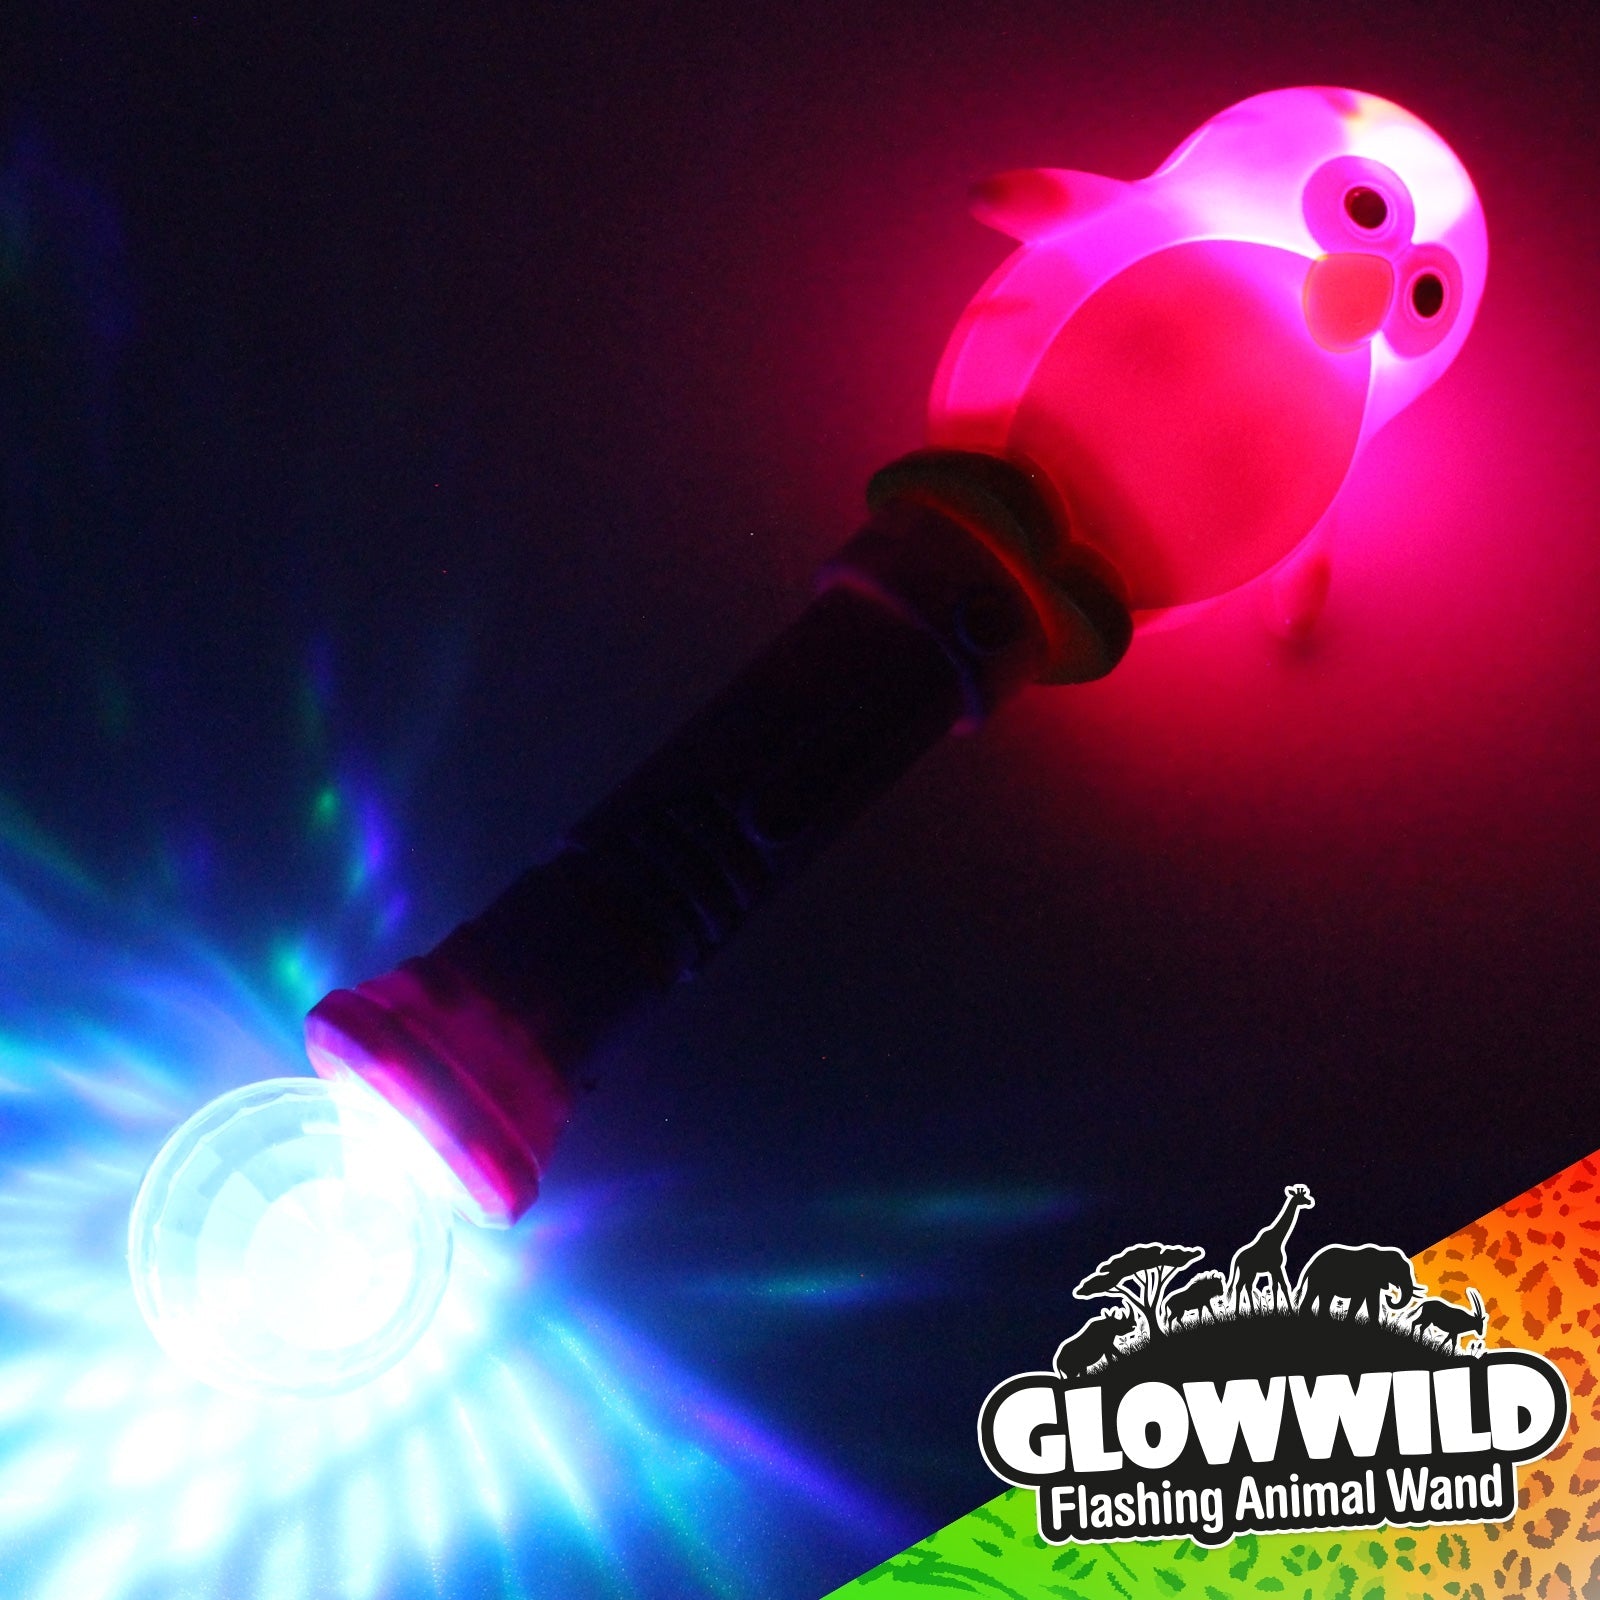 Penguin Mega Light Up Animal Wand 11", The coolest animal wand, this cute Penguin Mega Light Up Animal Wand is packed full of multi coloured, flashing LEDs that cycle through funky colour flash effects! A substantial wand or baton that's topped with a pink or blue penguin and finished at the base with a colourful disco ball, this playful animal wand is a real attention grabber projecting colourful ilght onto surrounding surfaces for funky disco effects! With batteries included, this cool Penguin Mega Light 